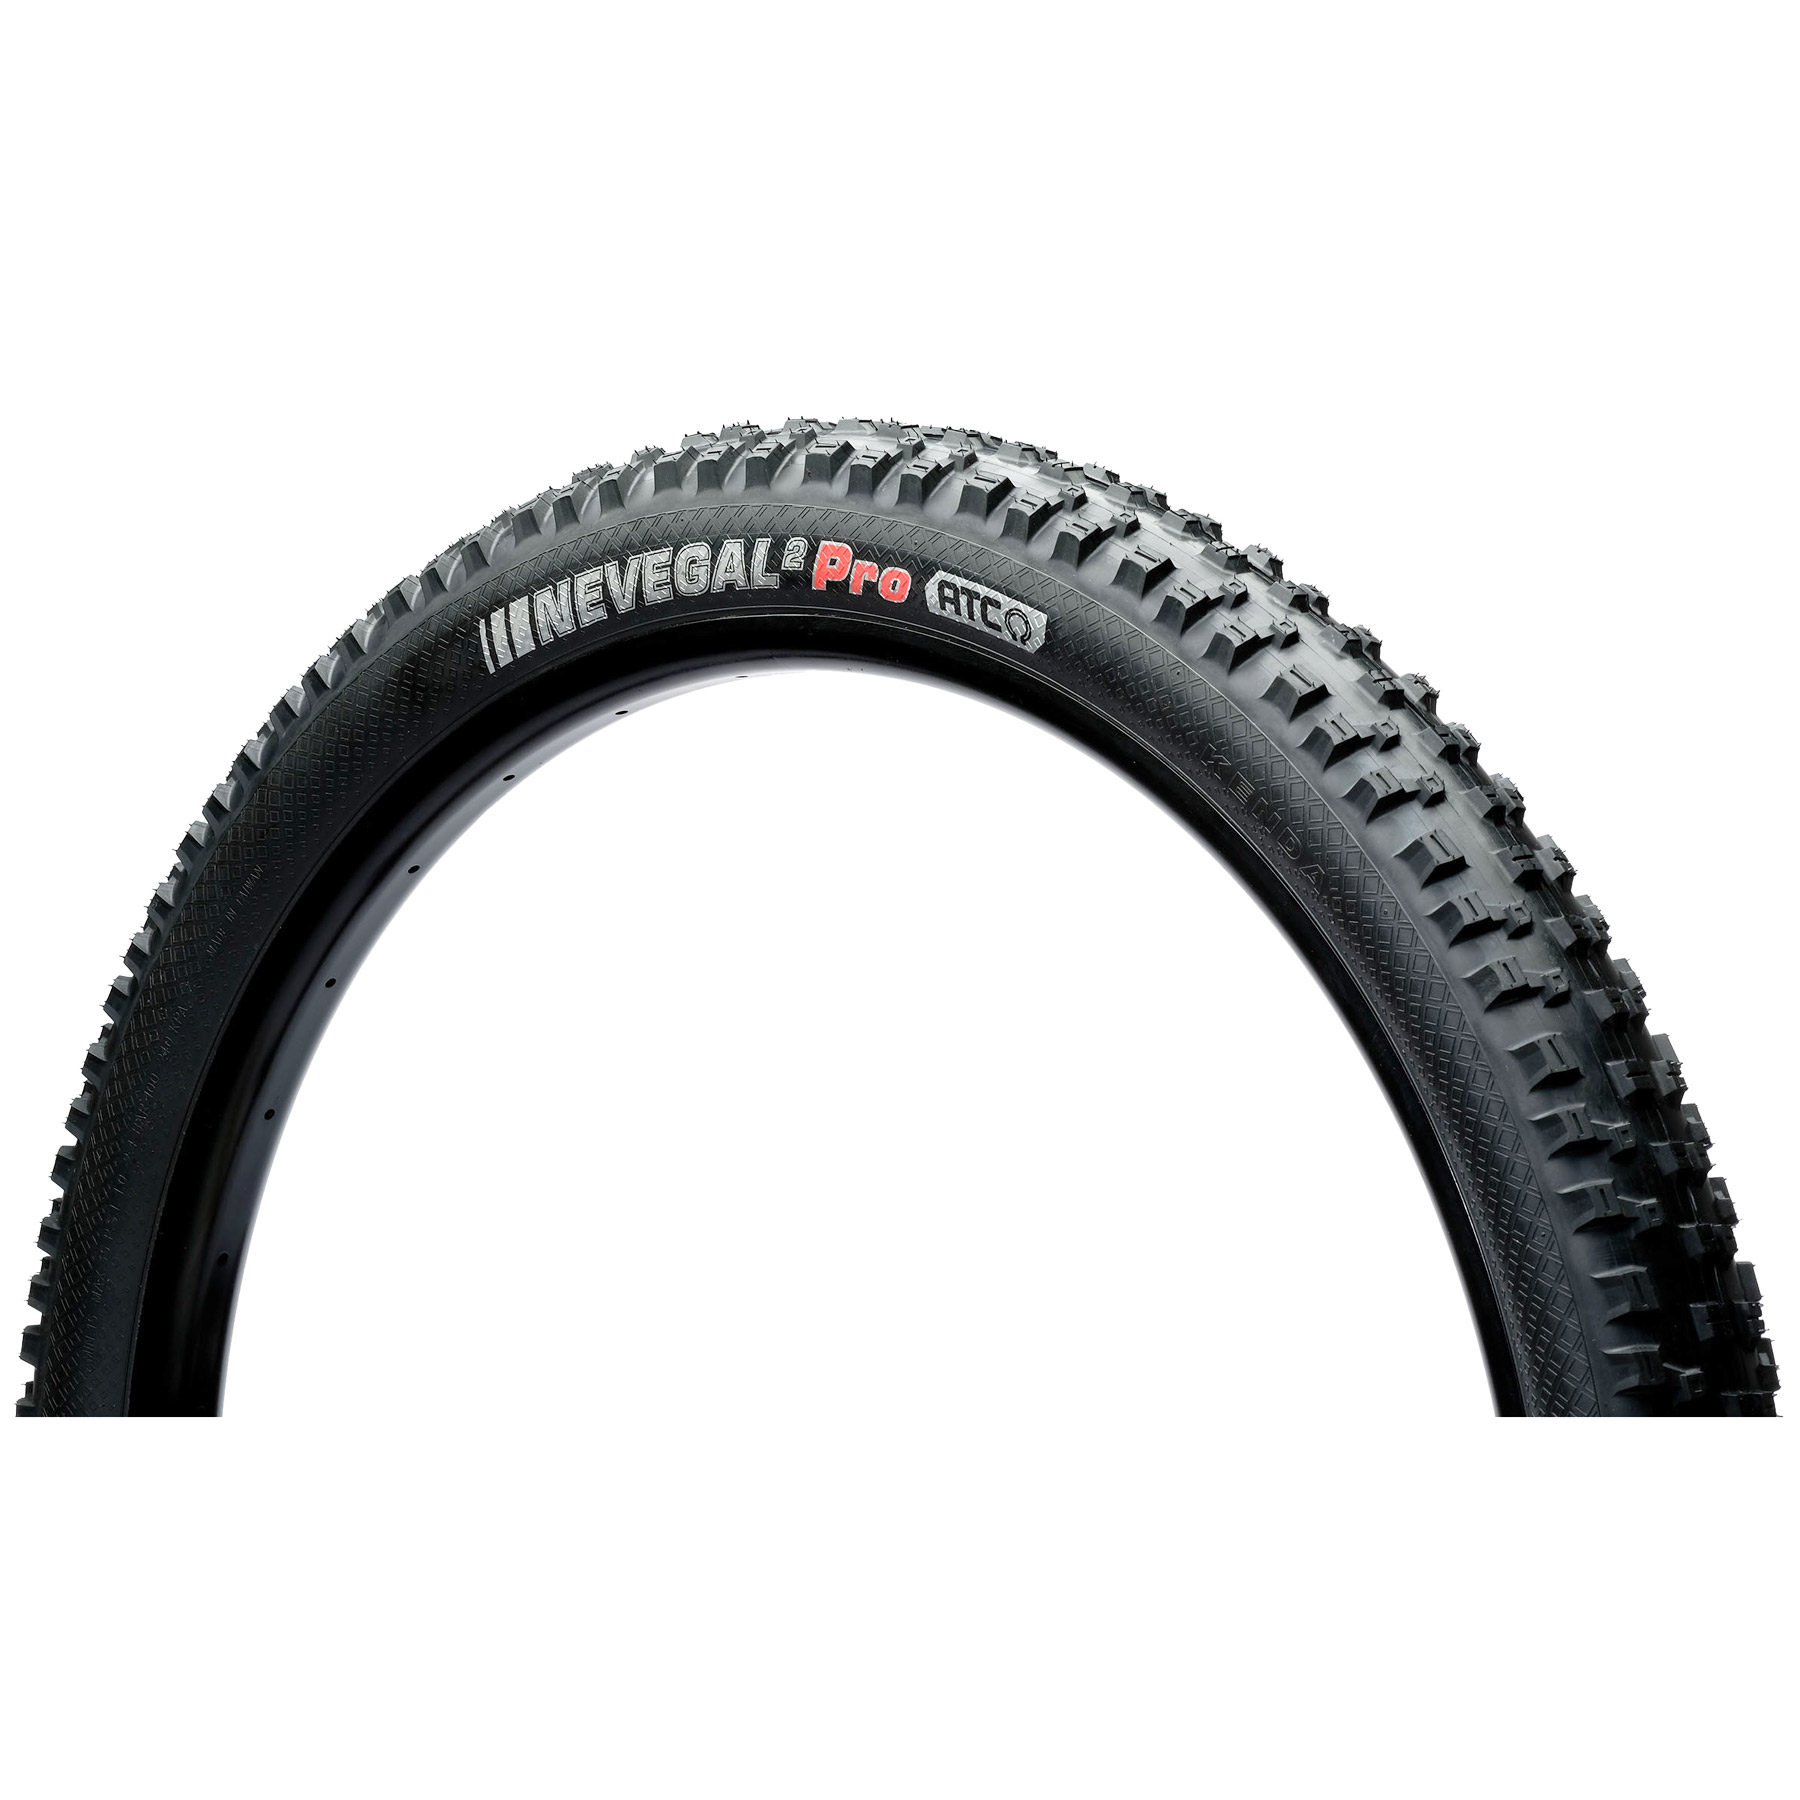 Picture of Kenda Nevegal 2 Pro ATC Folding Tire - 29x2.40 Inches